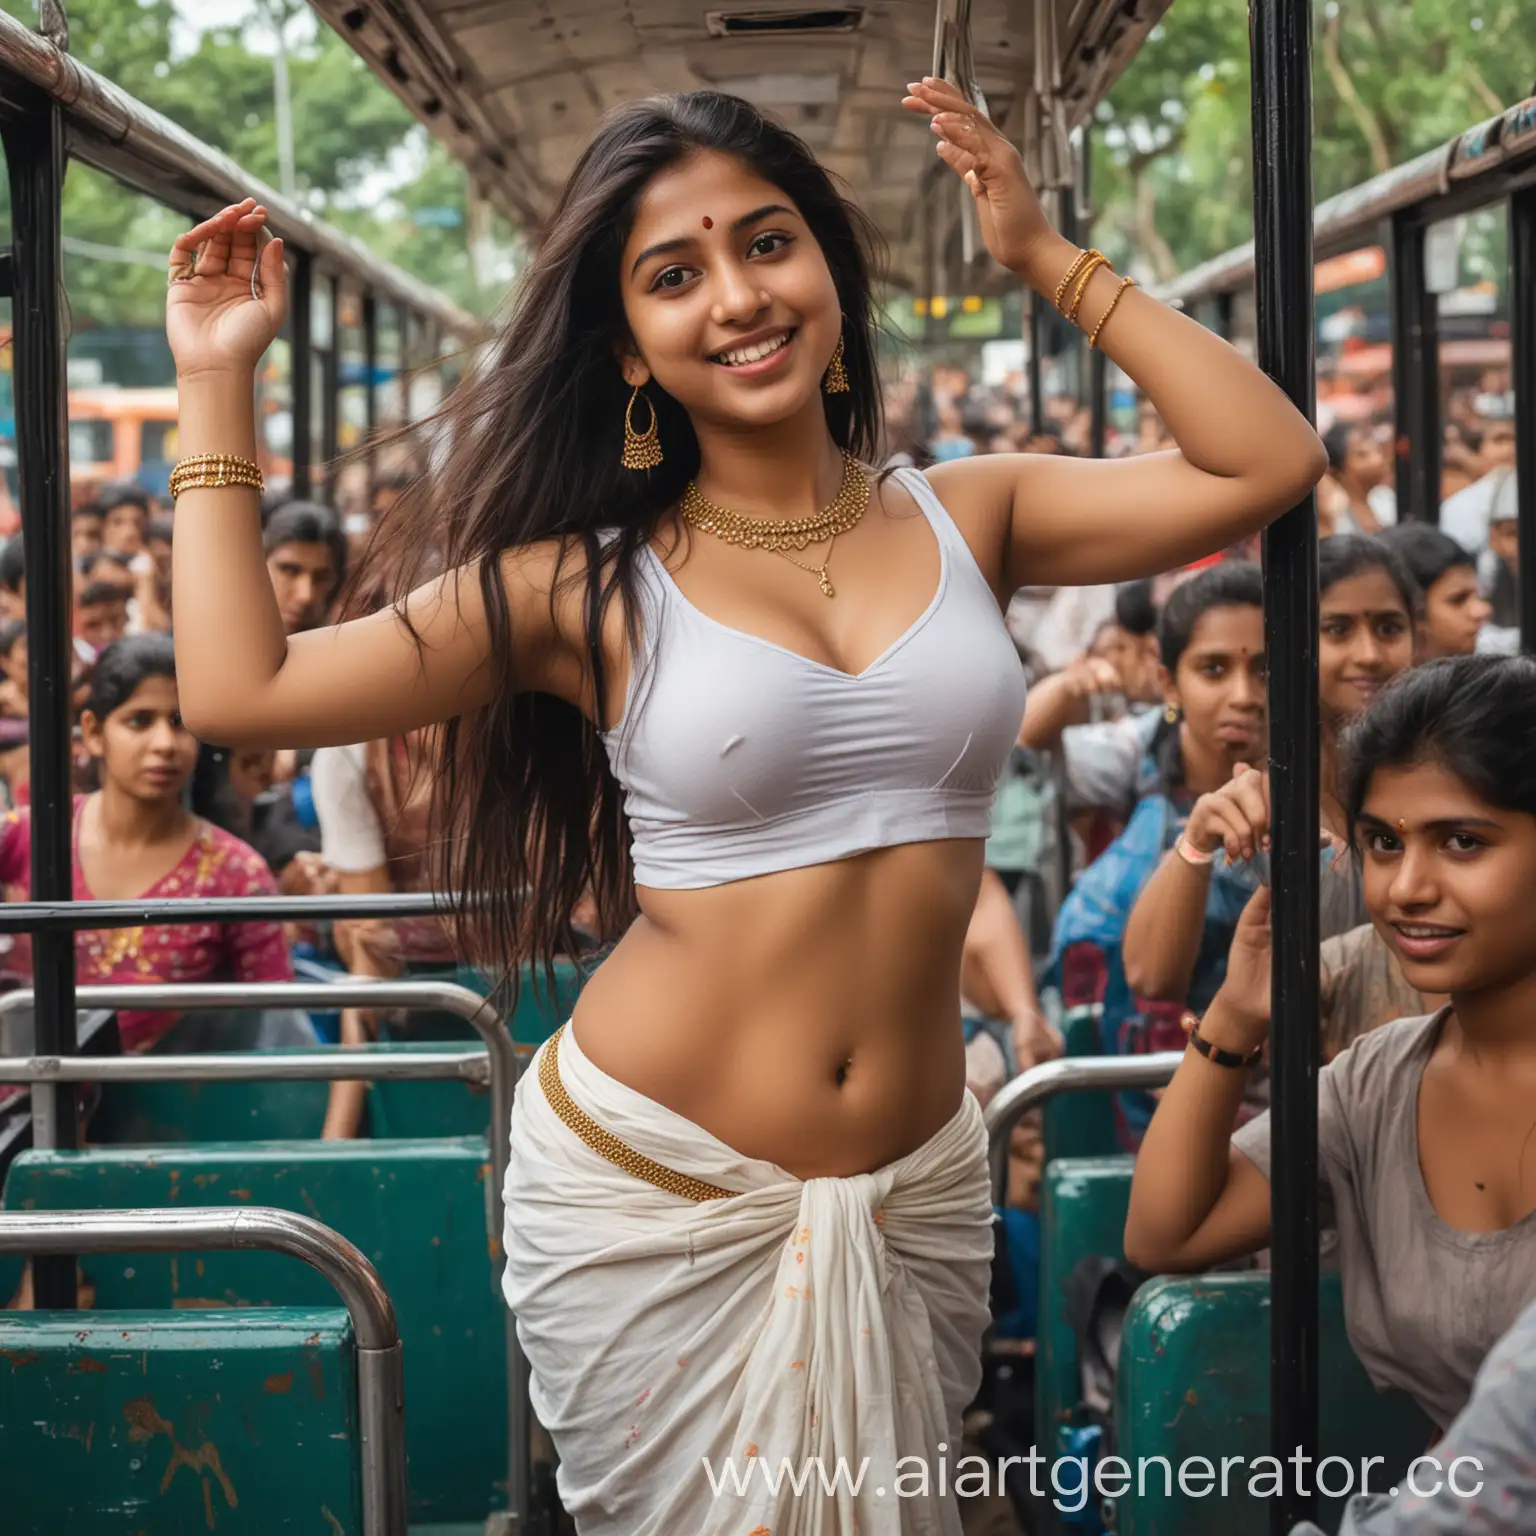 An enchanting thick fat Indian girl with a fair, smooth complexion, her long, dark hair flowing down her back in a casual mess. She possesses an attractive figure, accentuated by her modest yet alluring attire - a low-waisted dhoti, revealing her slender waist and hips. Her perfect figure is on full display as she stands in a crowded bus, stretching her arms up to their fullest extent, reaching for the bus handle bar. Her deep navel is visible, accentuating her toned abdomen, and she wears a delicate gold chain around her neck. The background of the image is filled with a sea of people, their faces a blur of vibrant colors as they go about their daily routines. The bus is old and paint-chipped, but it carries its passengers with pride, rocking gently as it navigates through the bustling streets. The girl's confident smile and determined expression convey her resilience and adaptability in the face of the chaos around her.